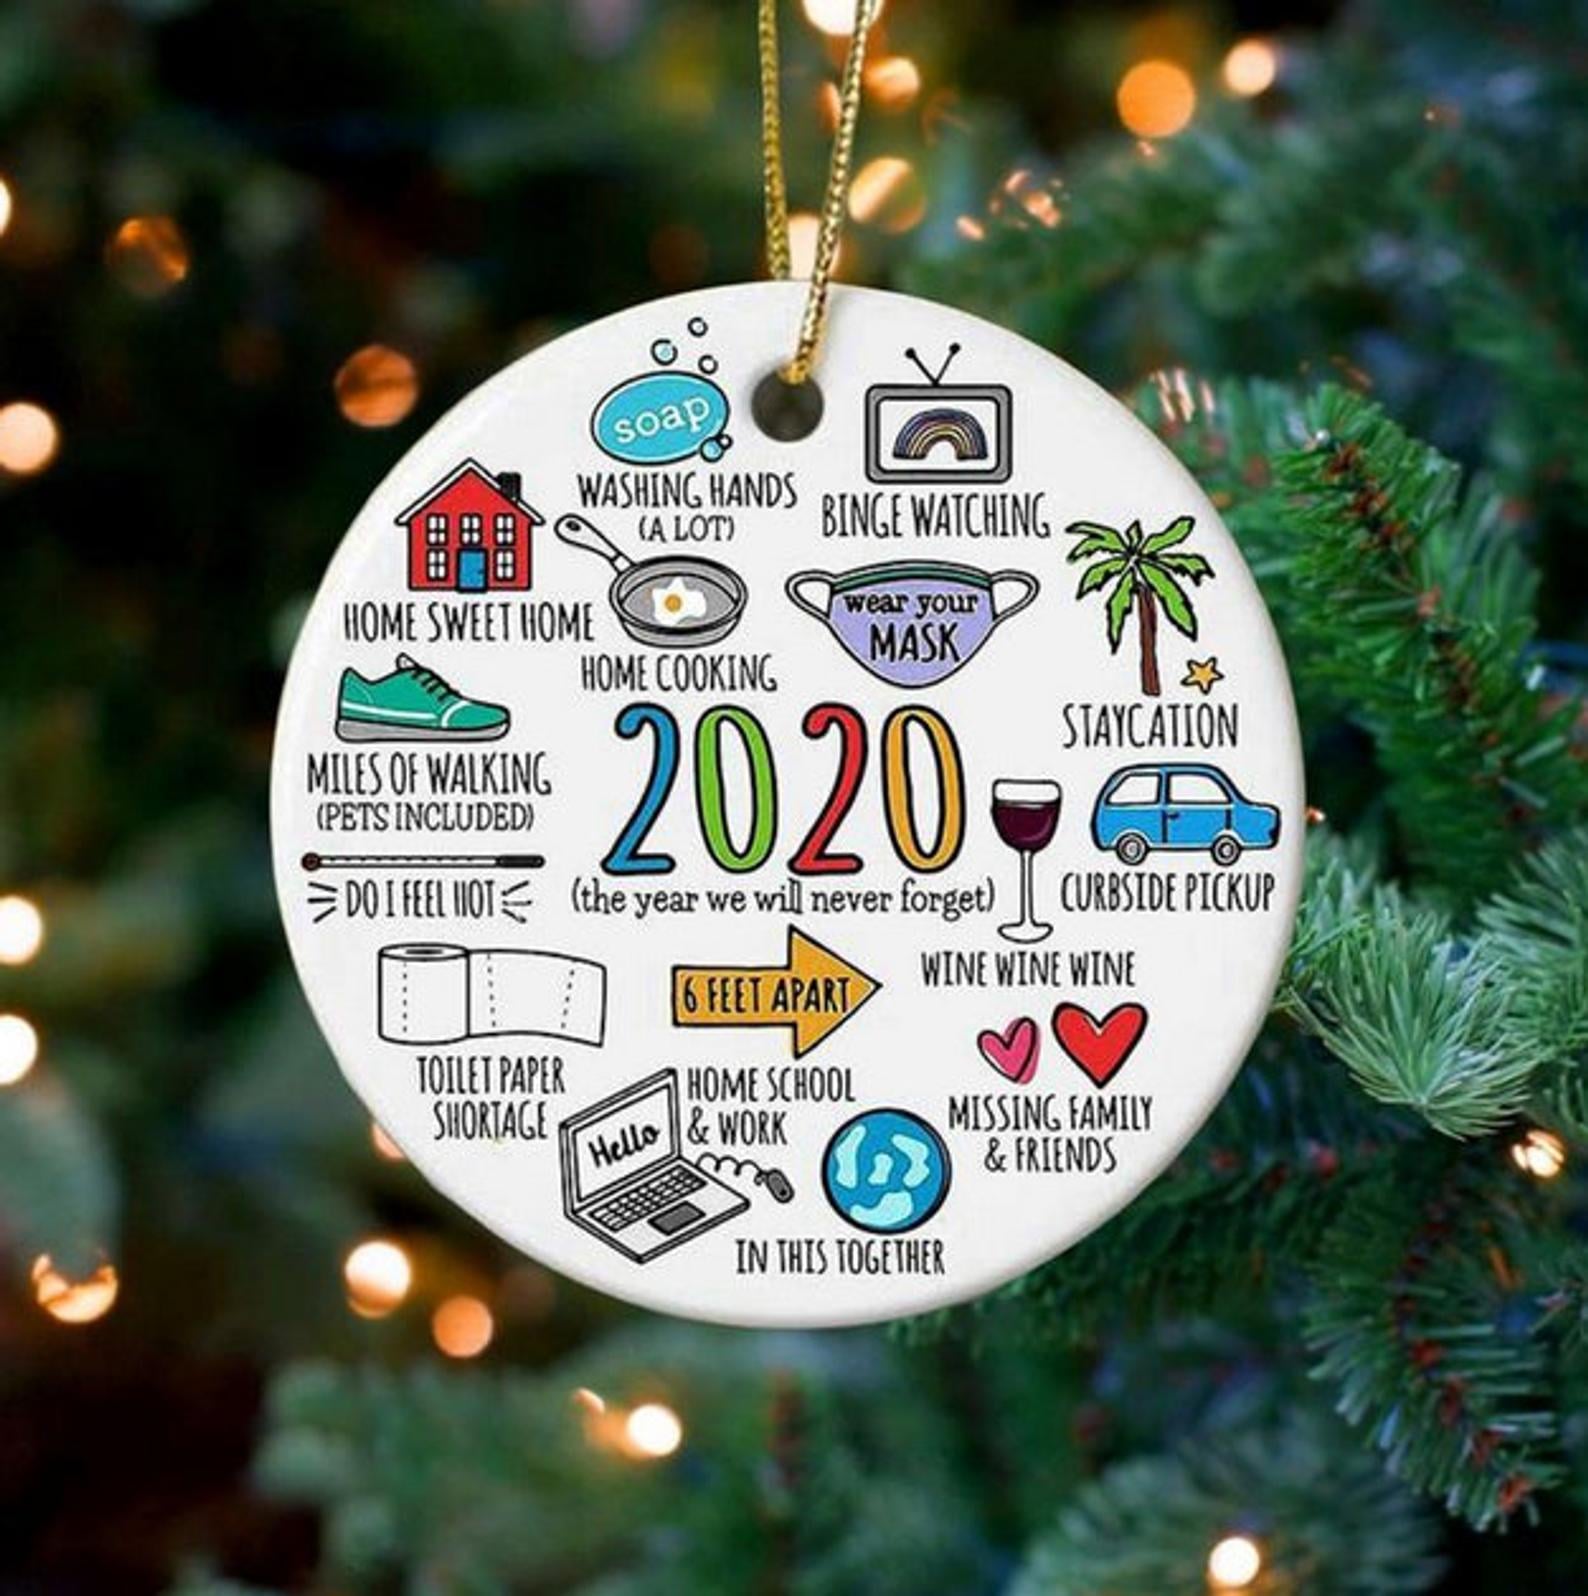 Novelty Toilet Paper Shaped 2020 Christmas Ornament Funny Holiday Keepsake with List of Quarantine Events